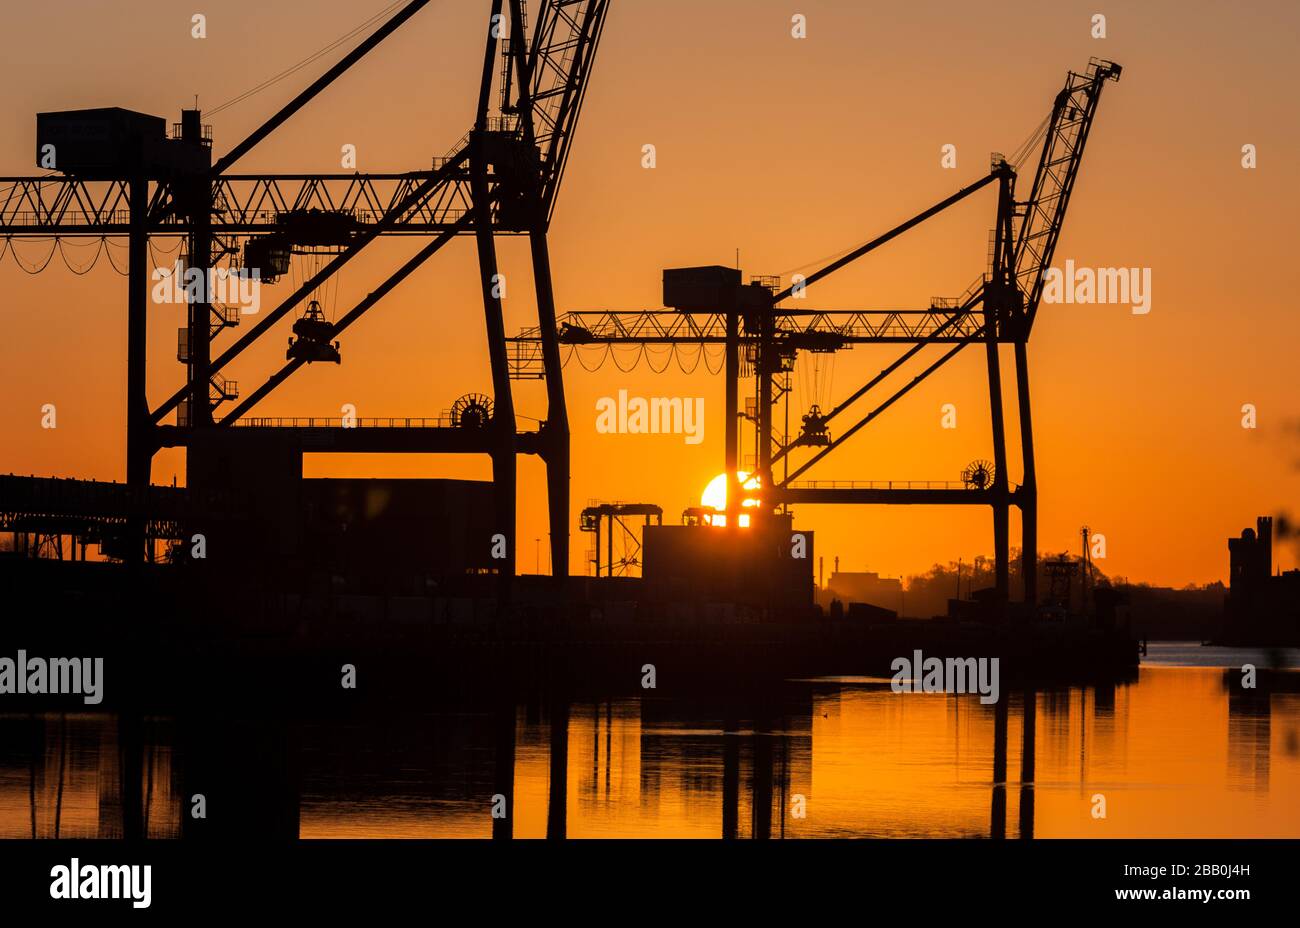 Tivoli, Cork, Ireland. 30th March, 2020. In critical times during the Covid-19 emergency the Irish economy is dependent on imports which are a lifeline to the country. Keeping this vital supply line open is the Port of Cork where the majority of the countries imports arrive.   Picture shows Gantry Cranes silhouetted by the rising sun at Tivoli Docks in Cork City, Ireland.    - Credit; David Creedon / Alamy Live News Stock Photo